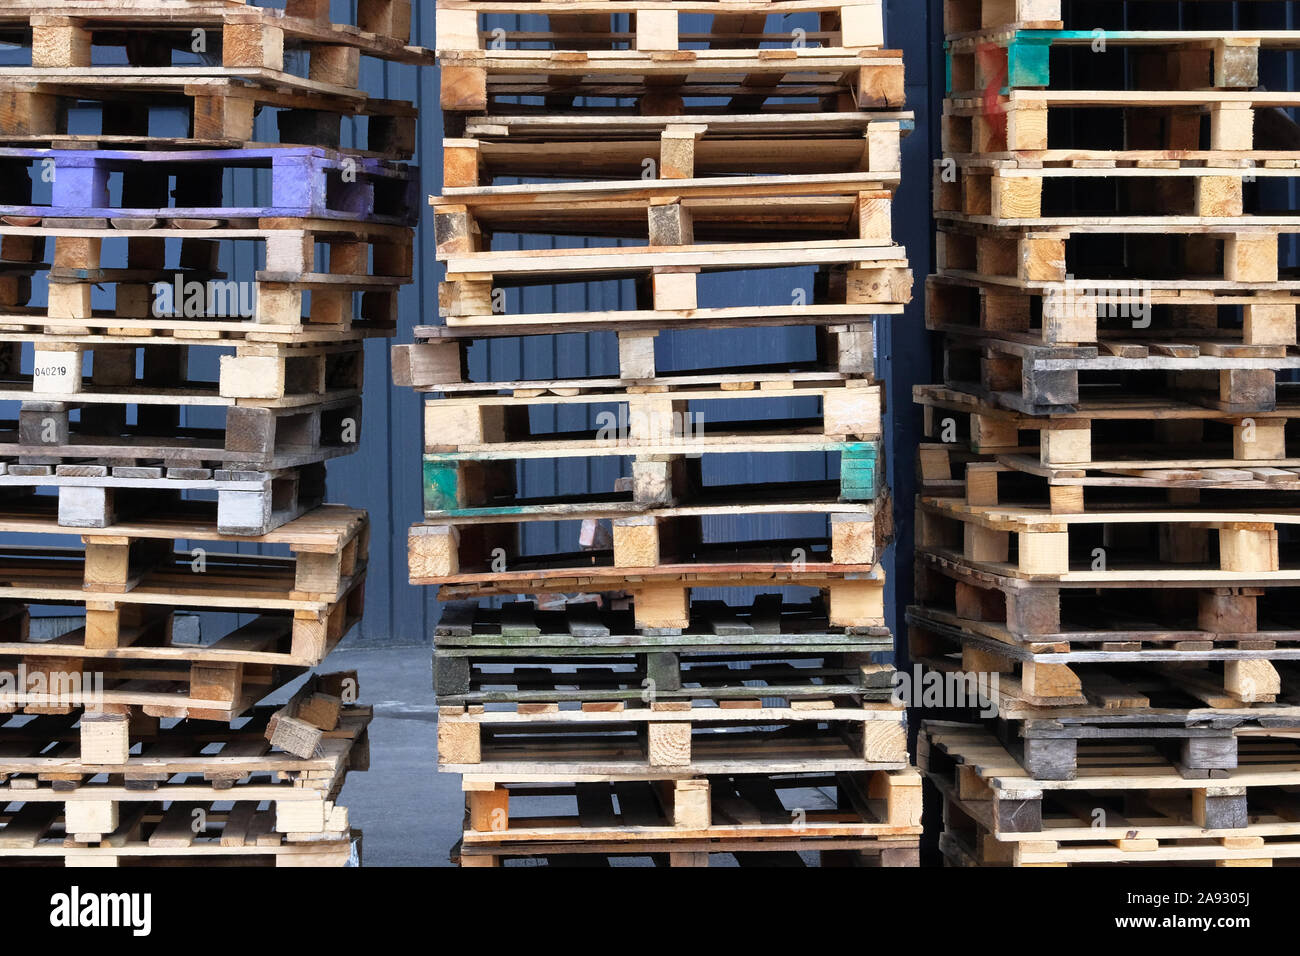 Pallets background. Stacks of colorful rough wooden pallets at warehouse in industrial yard. Cargo and shipping concept. Stock Photo